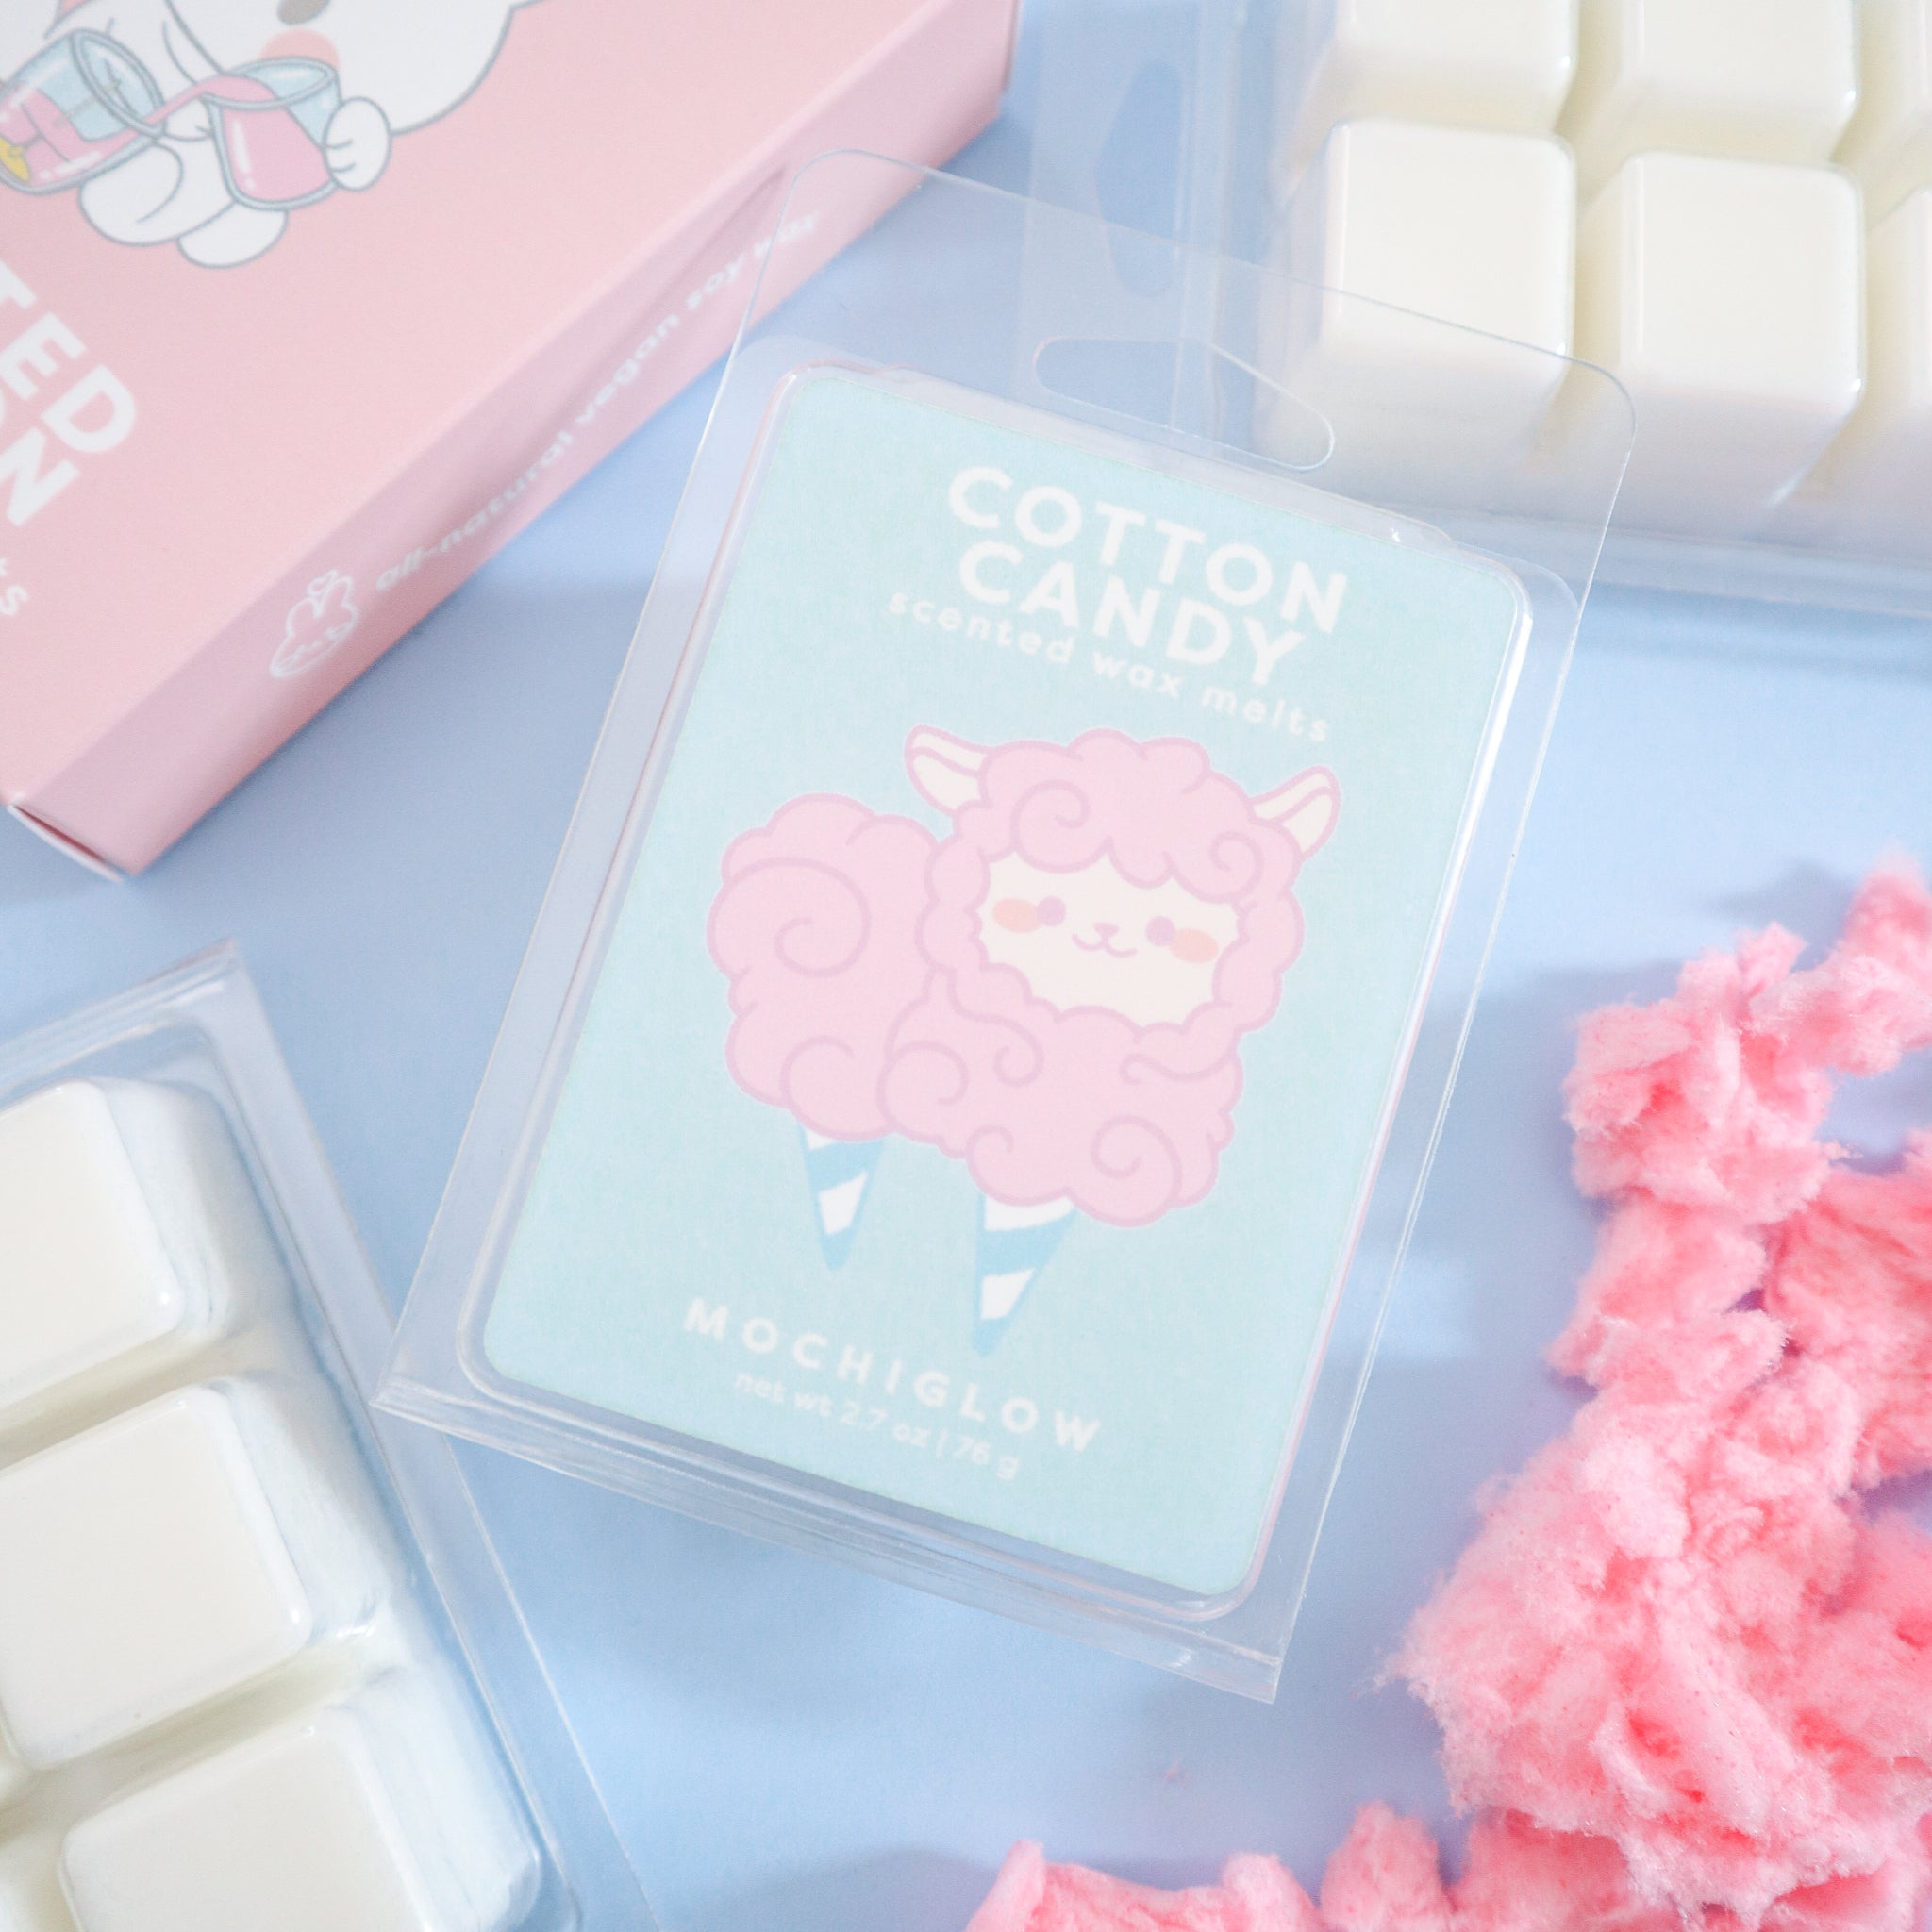 Cotton Candy Candle – Mochiglow